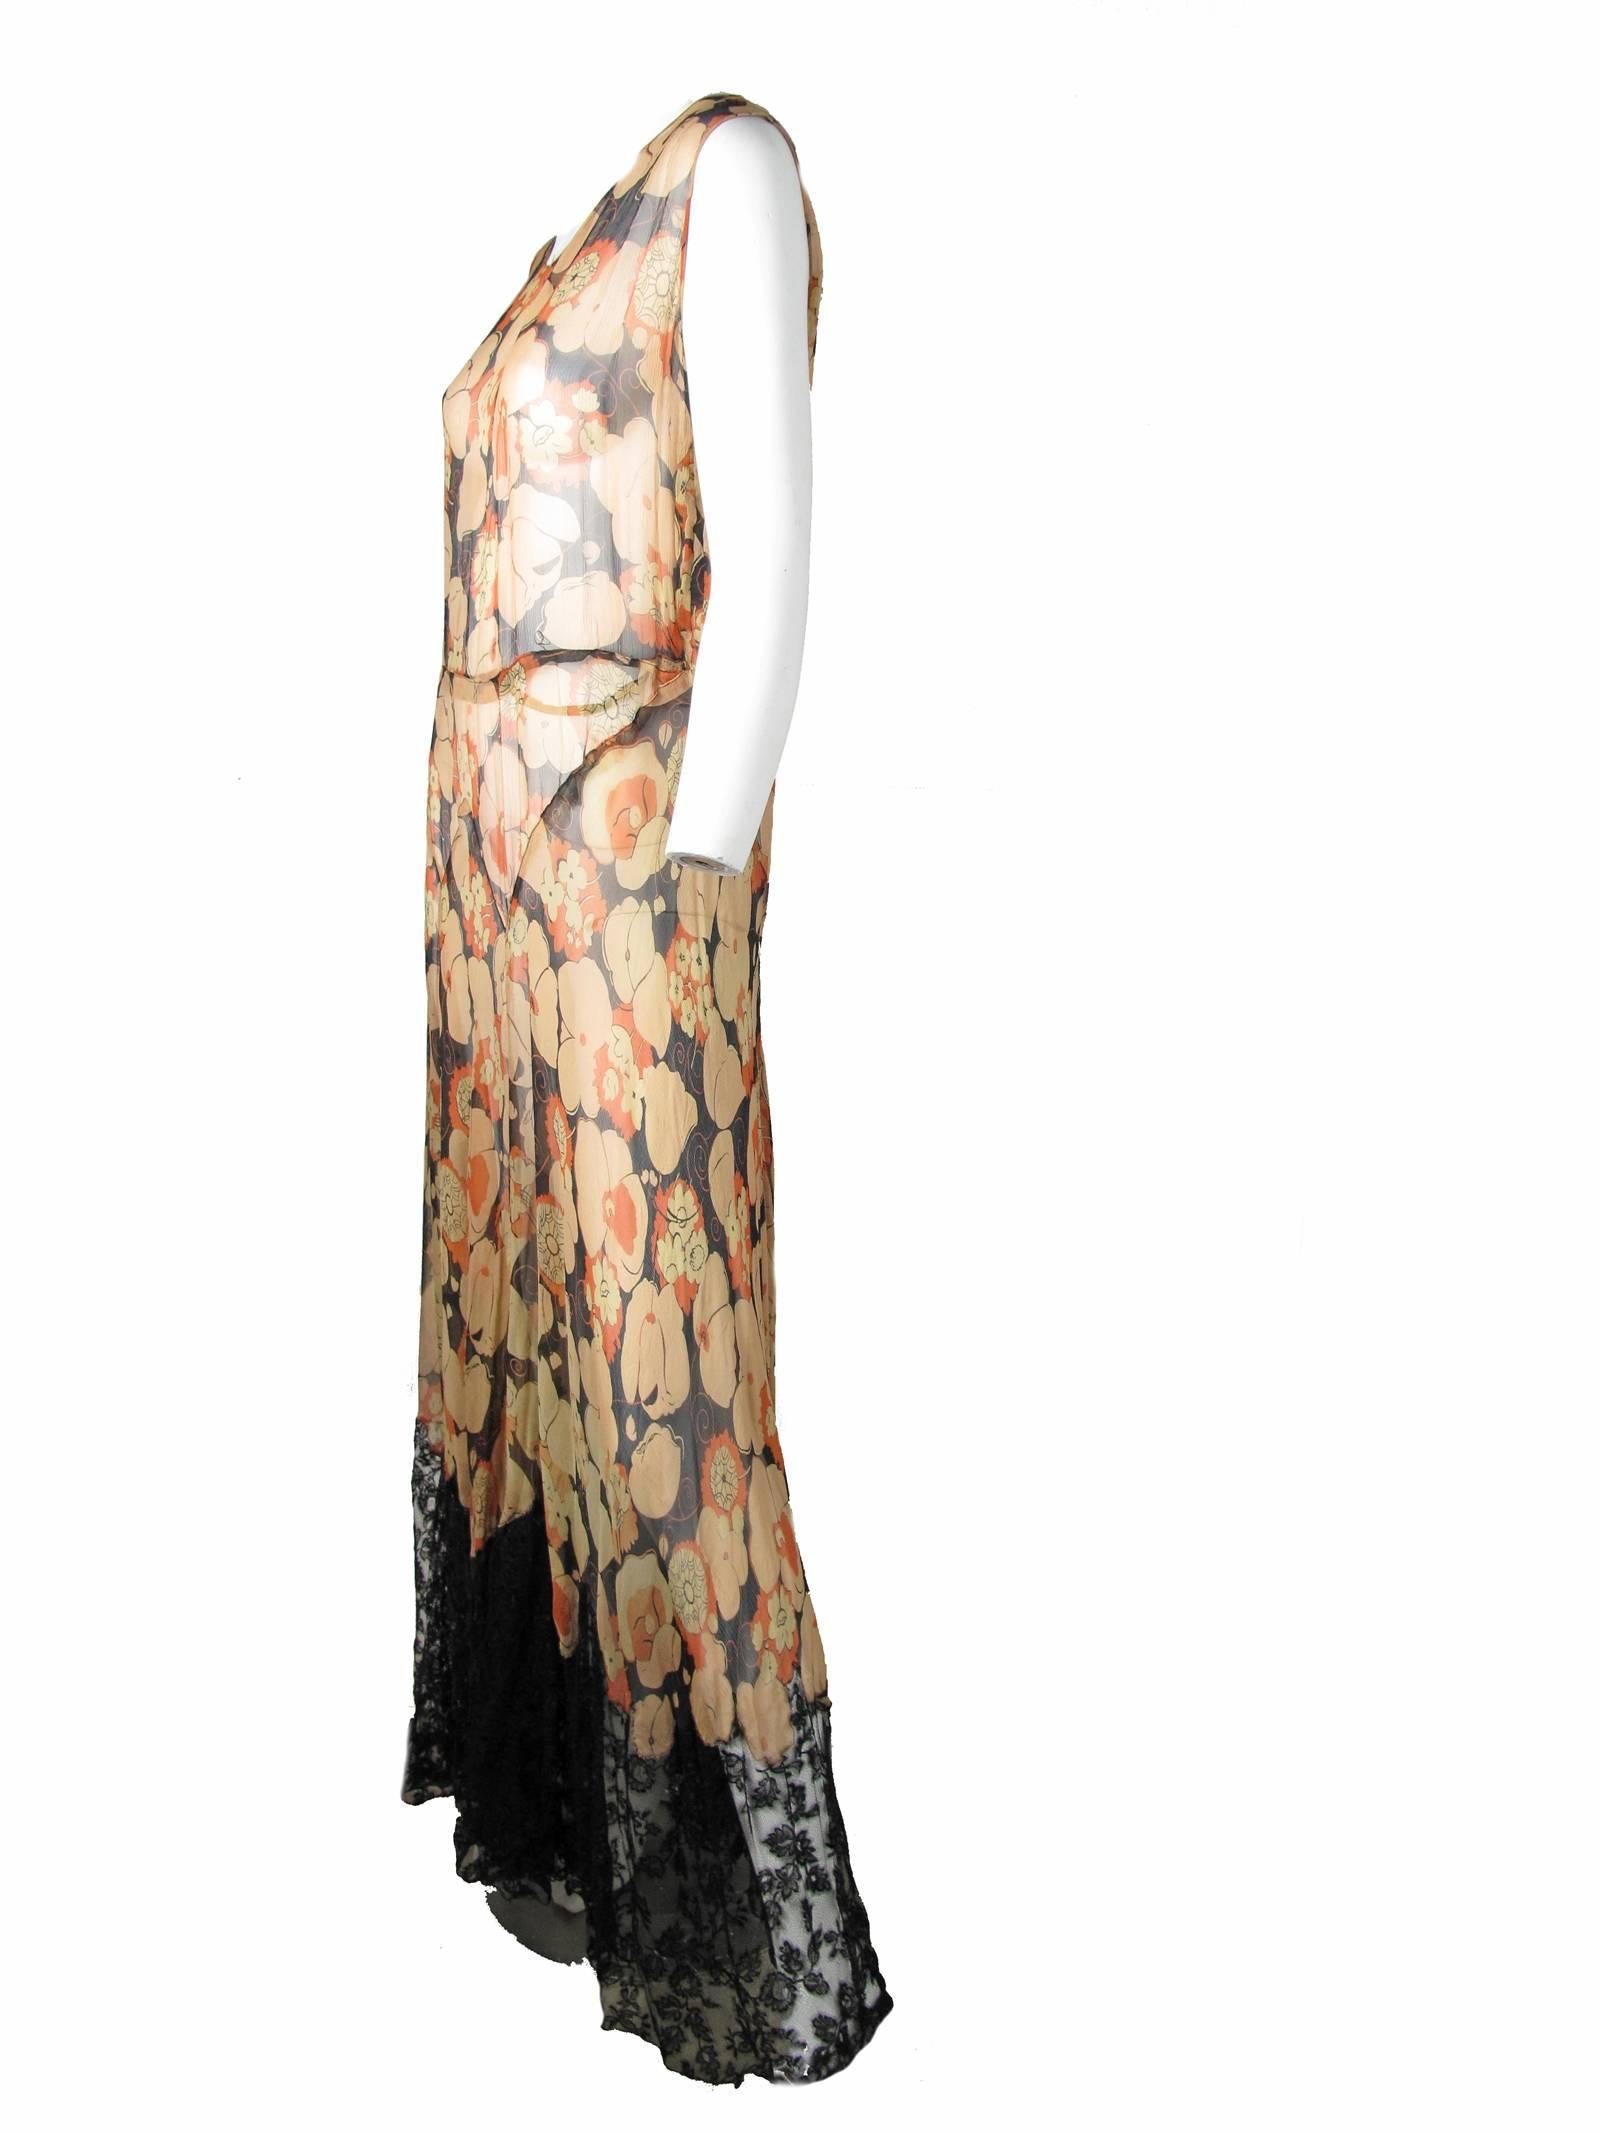 Brown Sheer Chiffon Floral Gown and Jacket with Lace, 1920s - 30s  